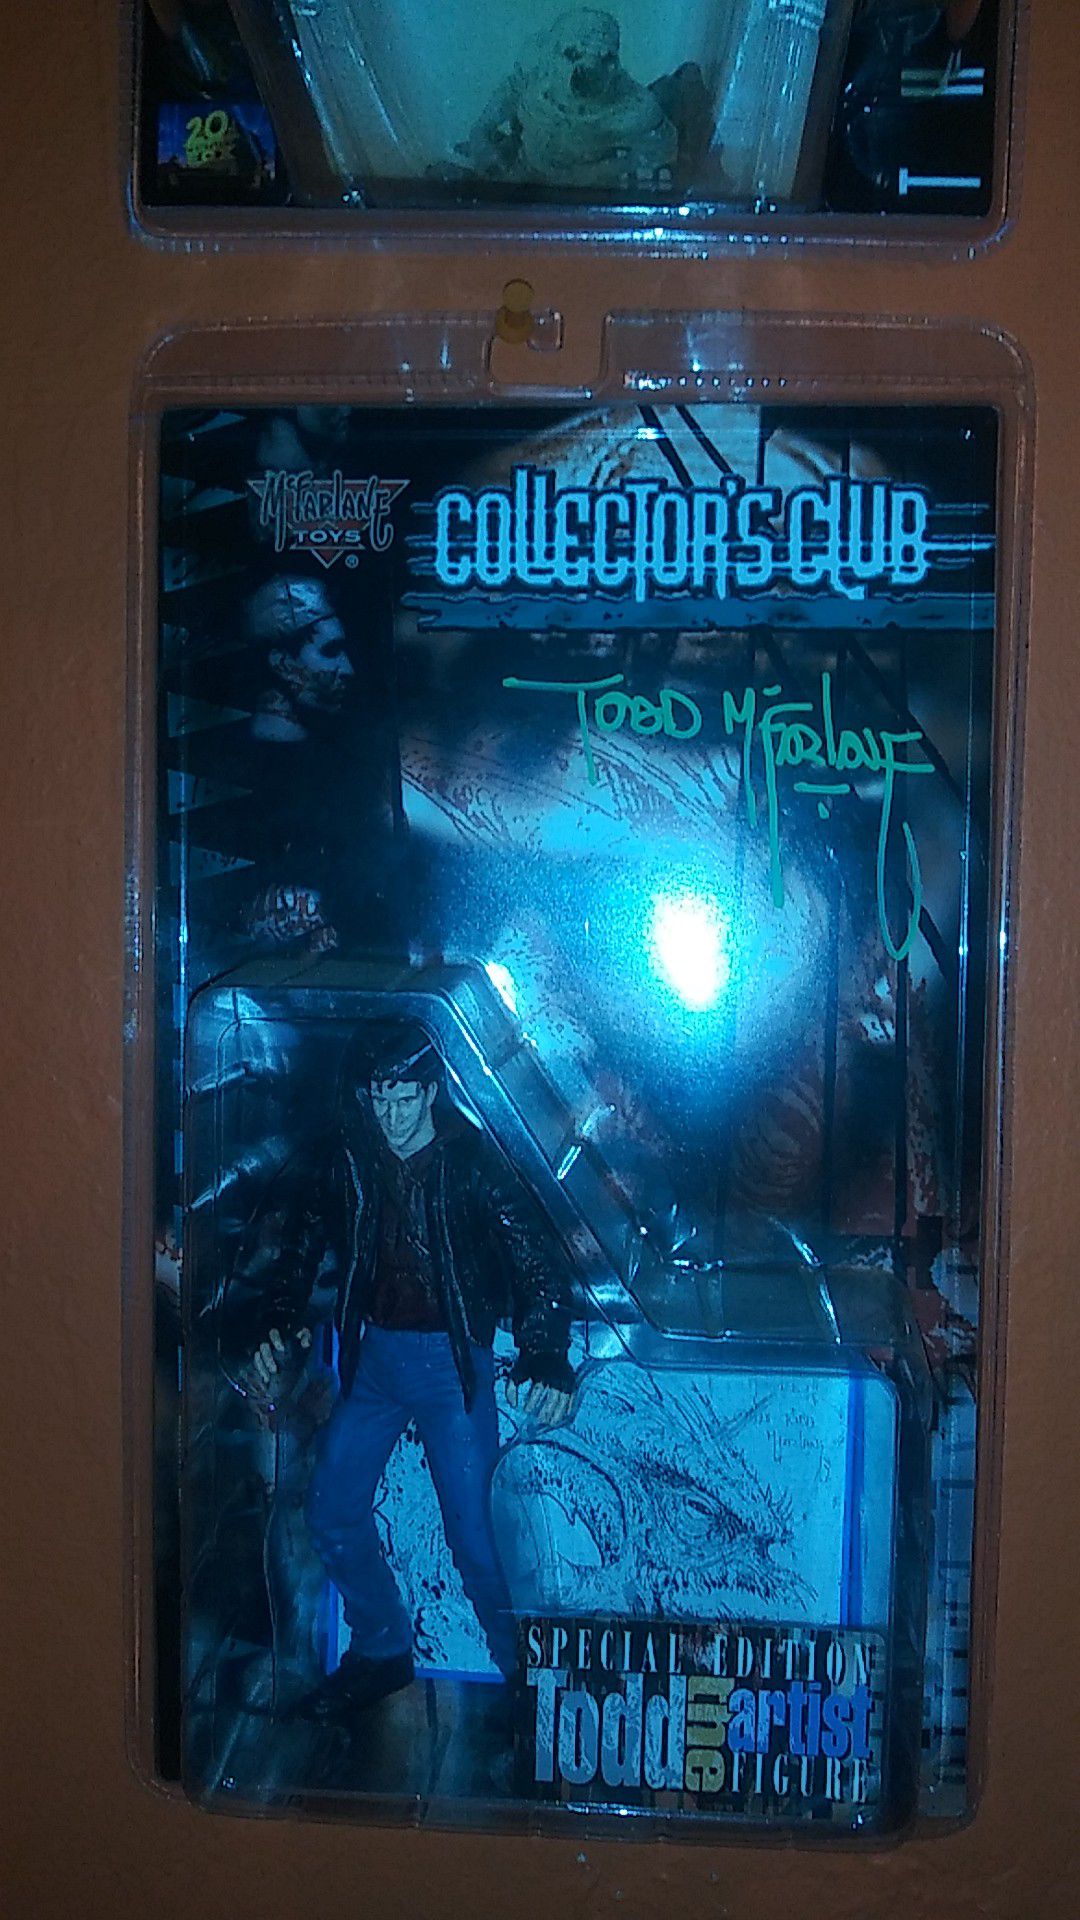 McFarlane Toys Todd McFarlane Autographed Club Exclusive Action Figure